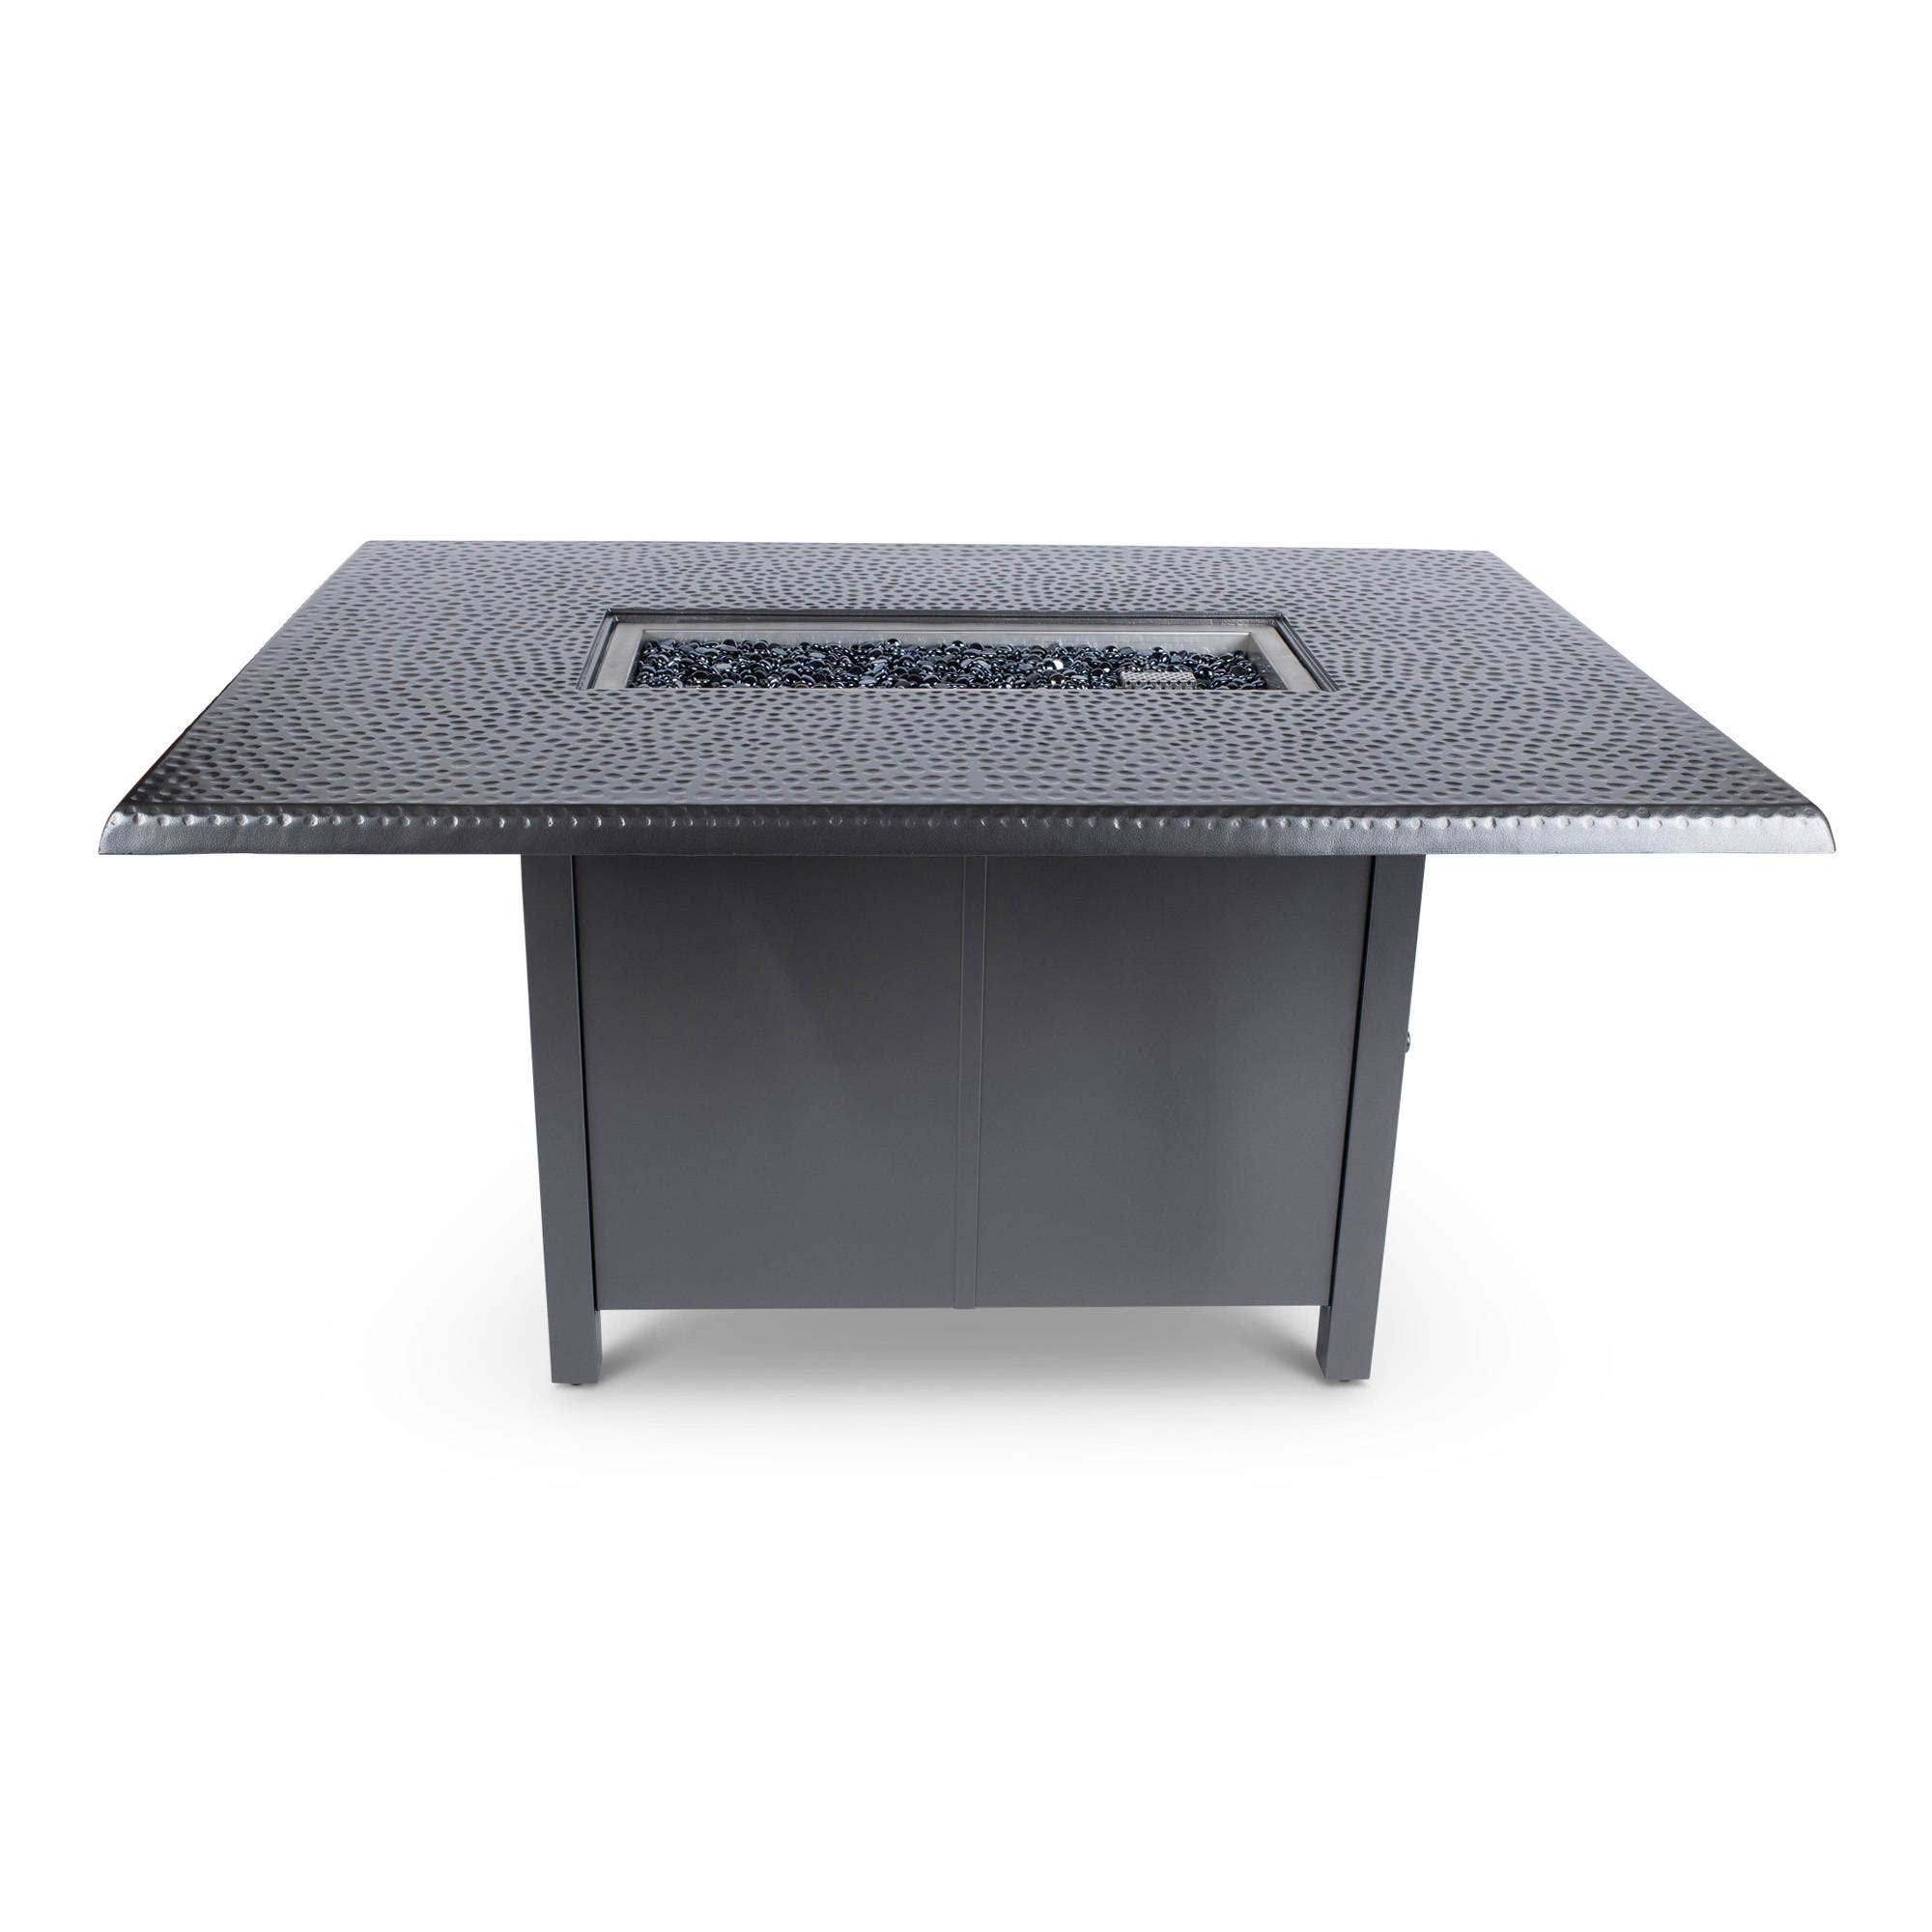 Woodard 42 inch x 60 inch Dining Height Fire Table with Hammered Top in Pewter Finish 12037577